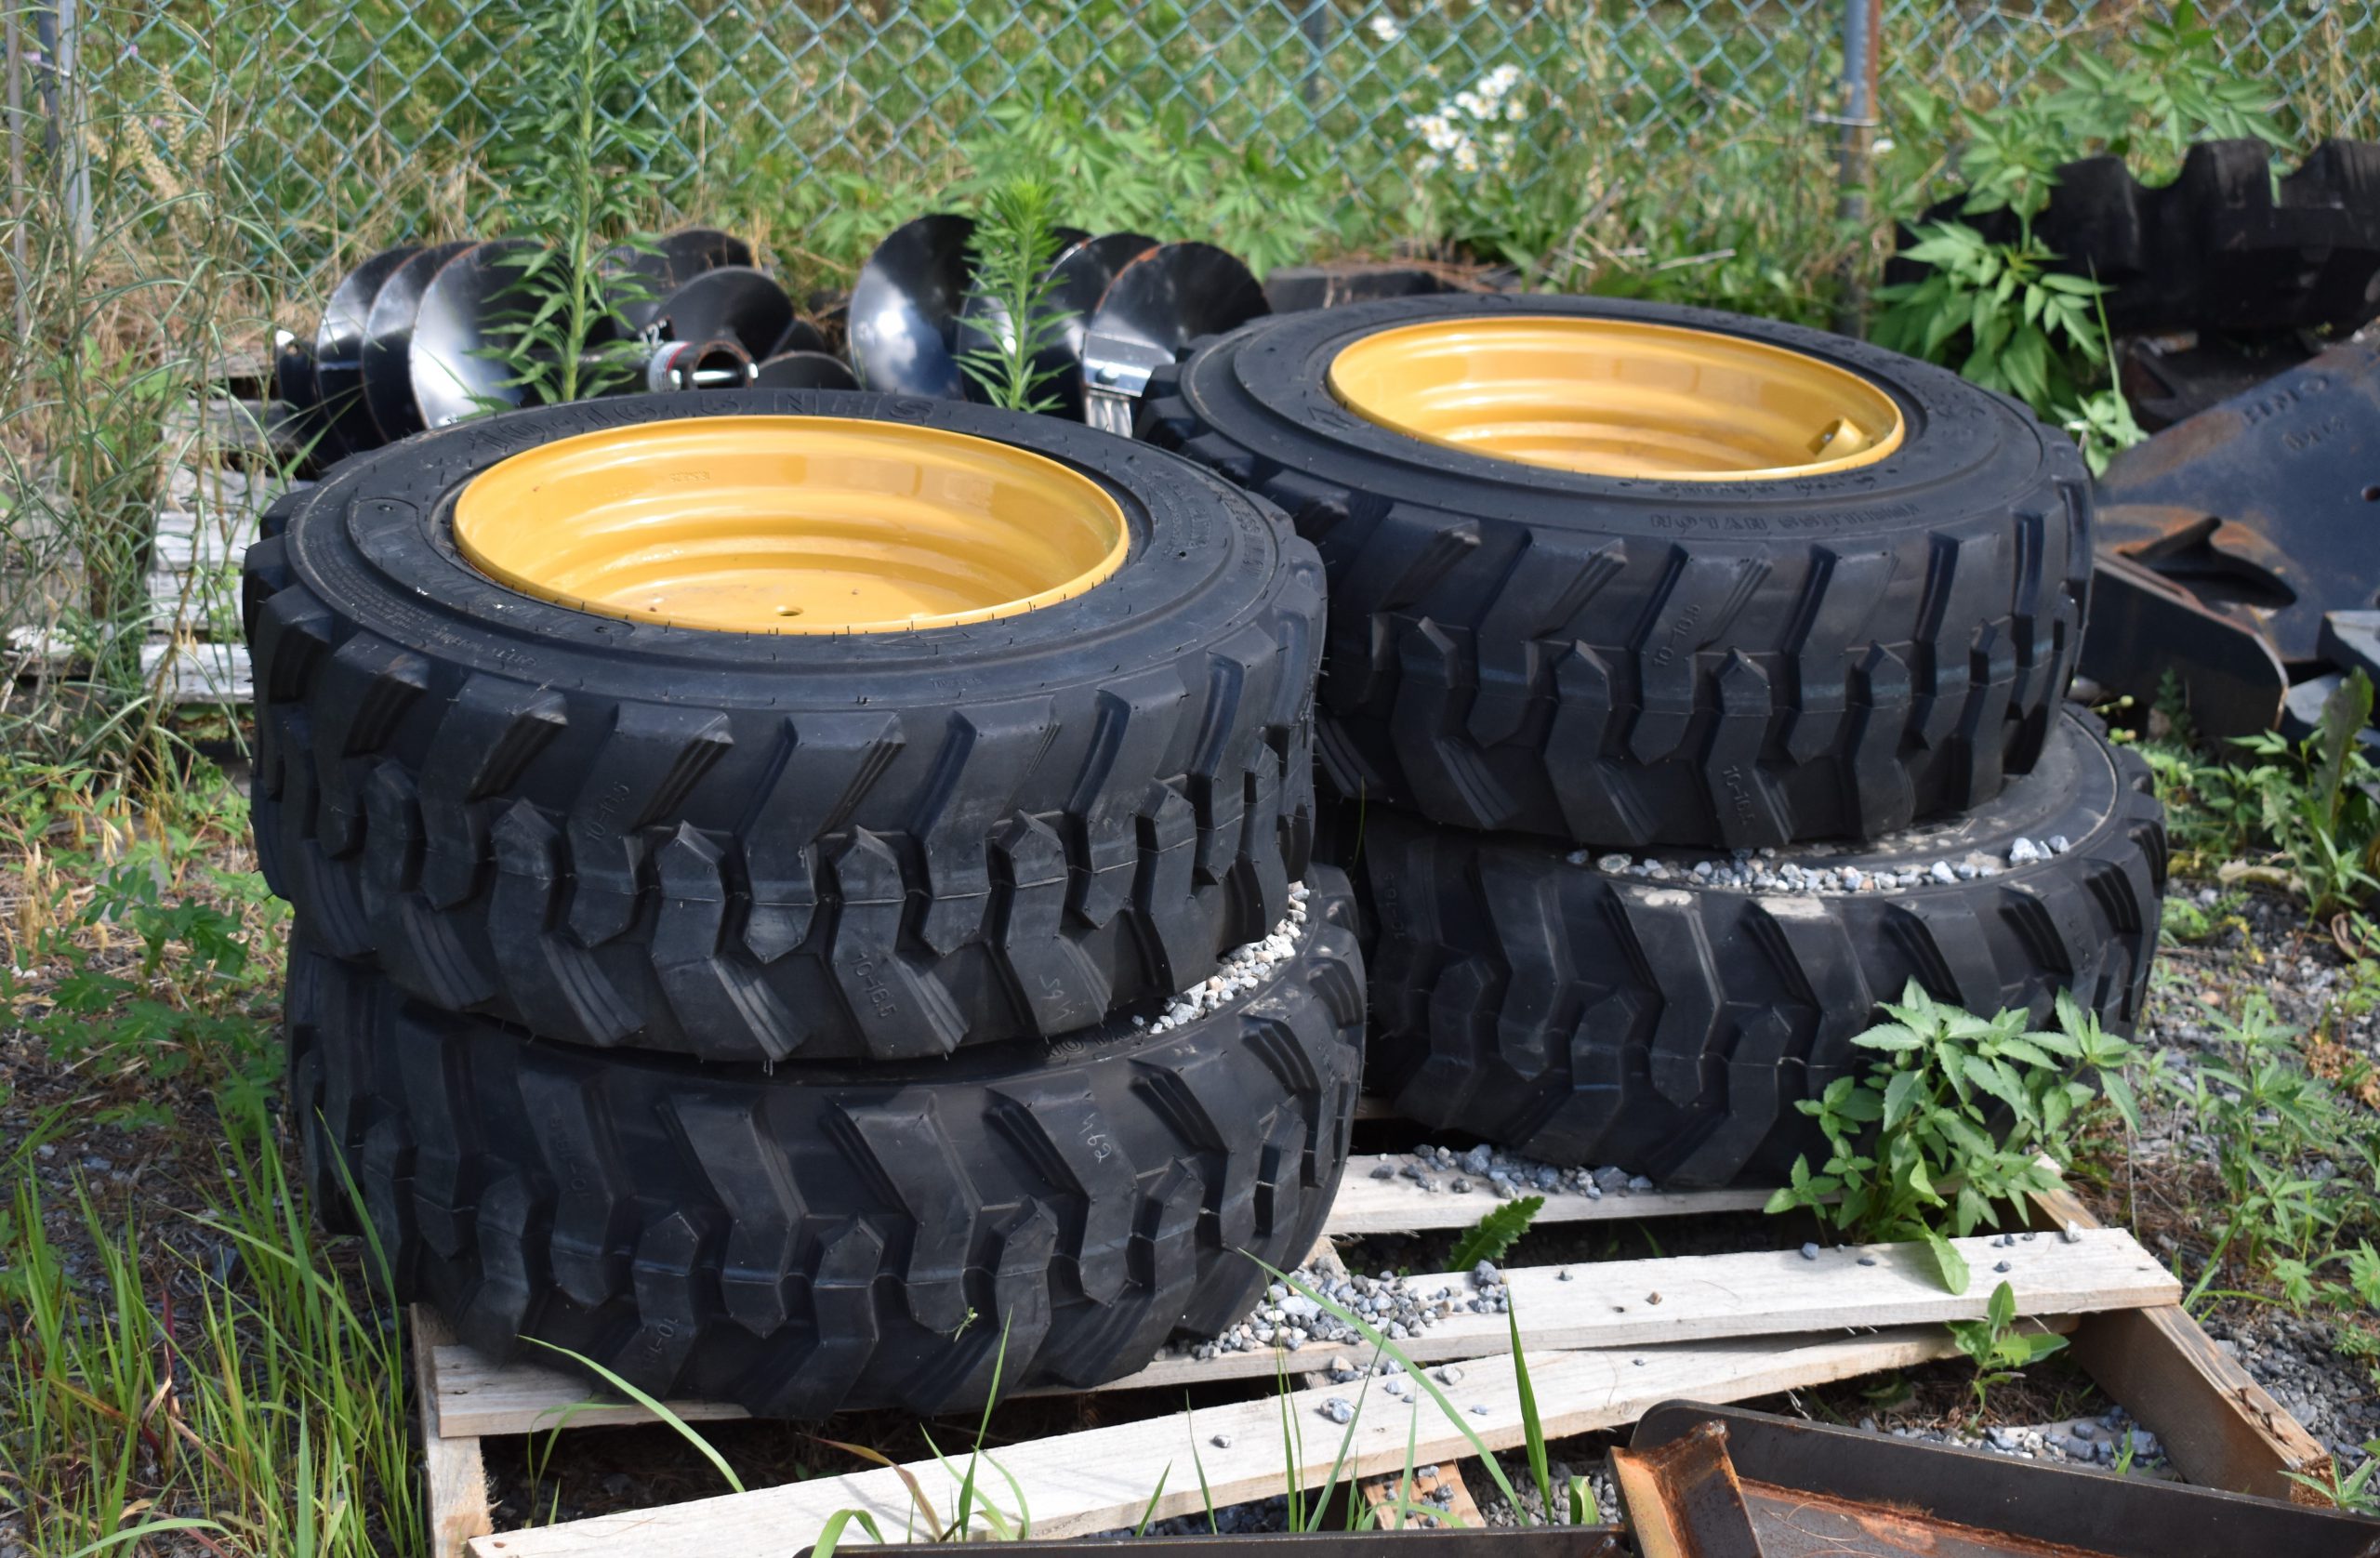 New Skid Steer Rims and Tires main image